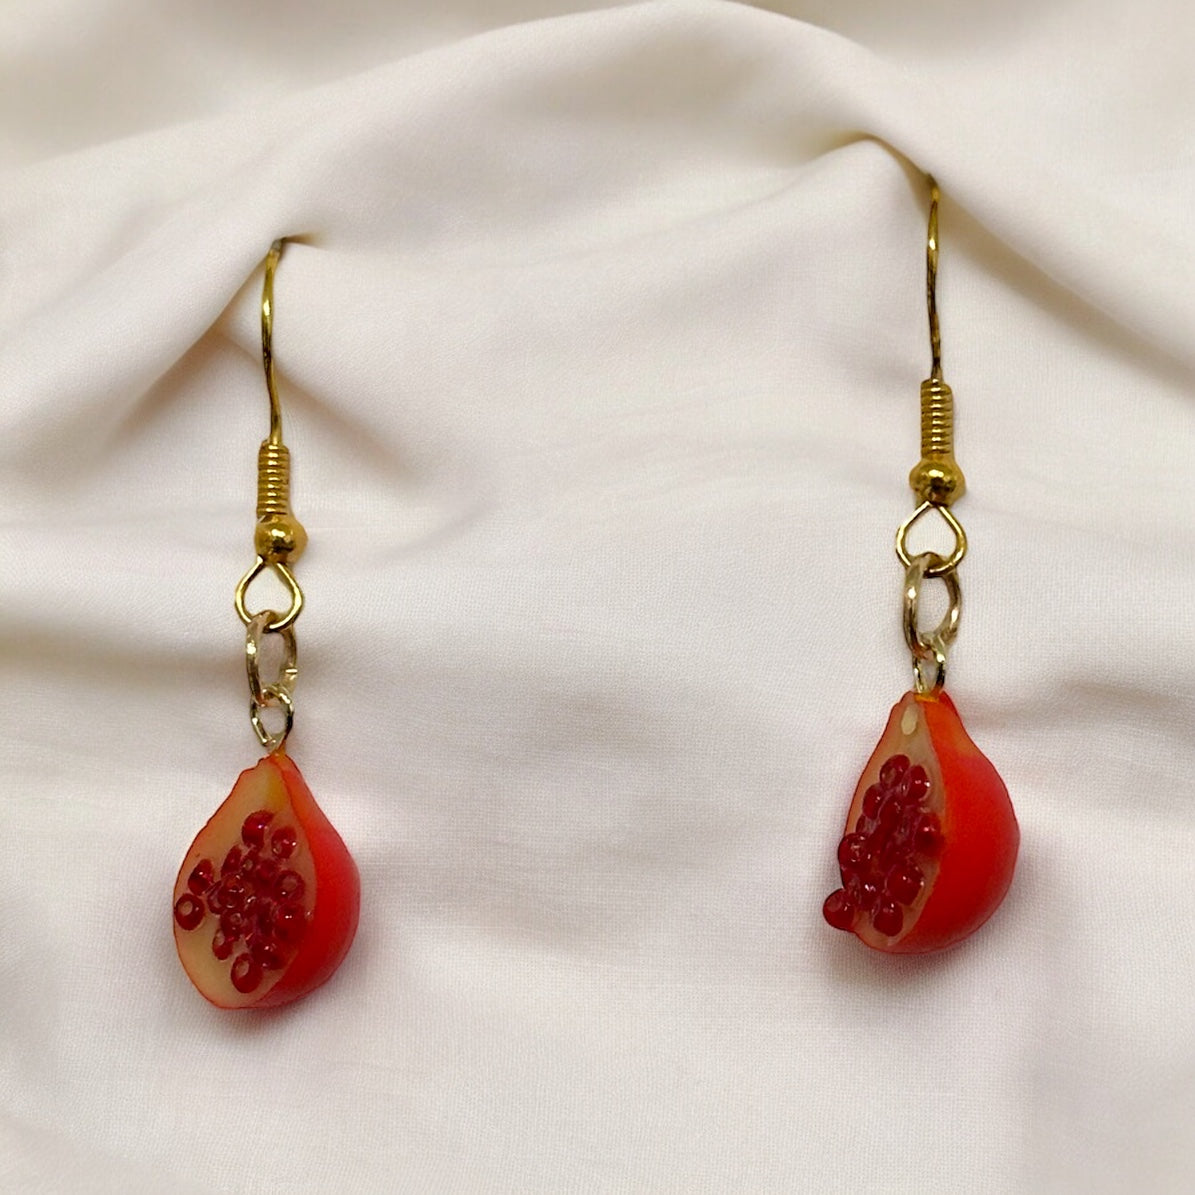 Pomegrante Earrings - Polymer Clay & Resin